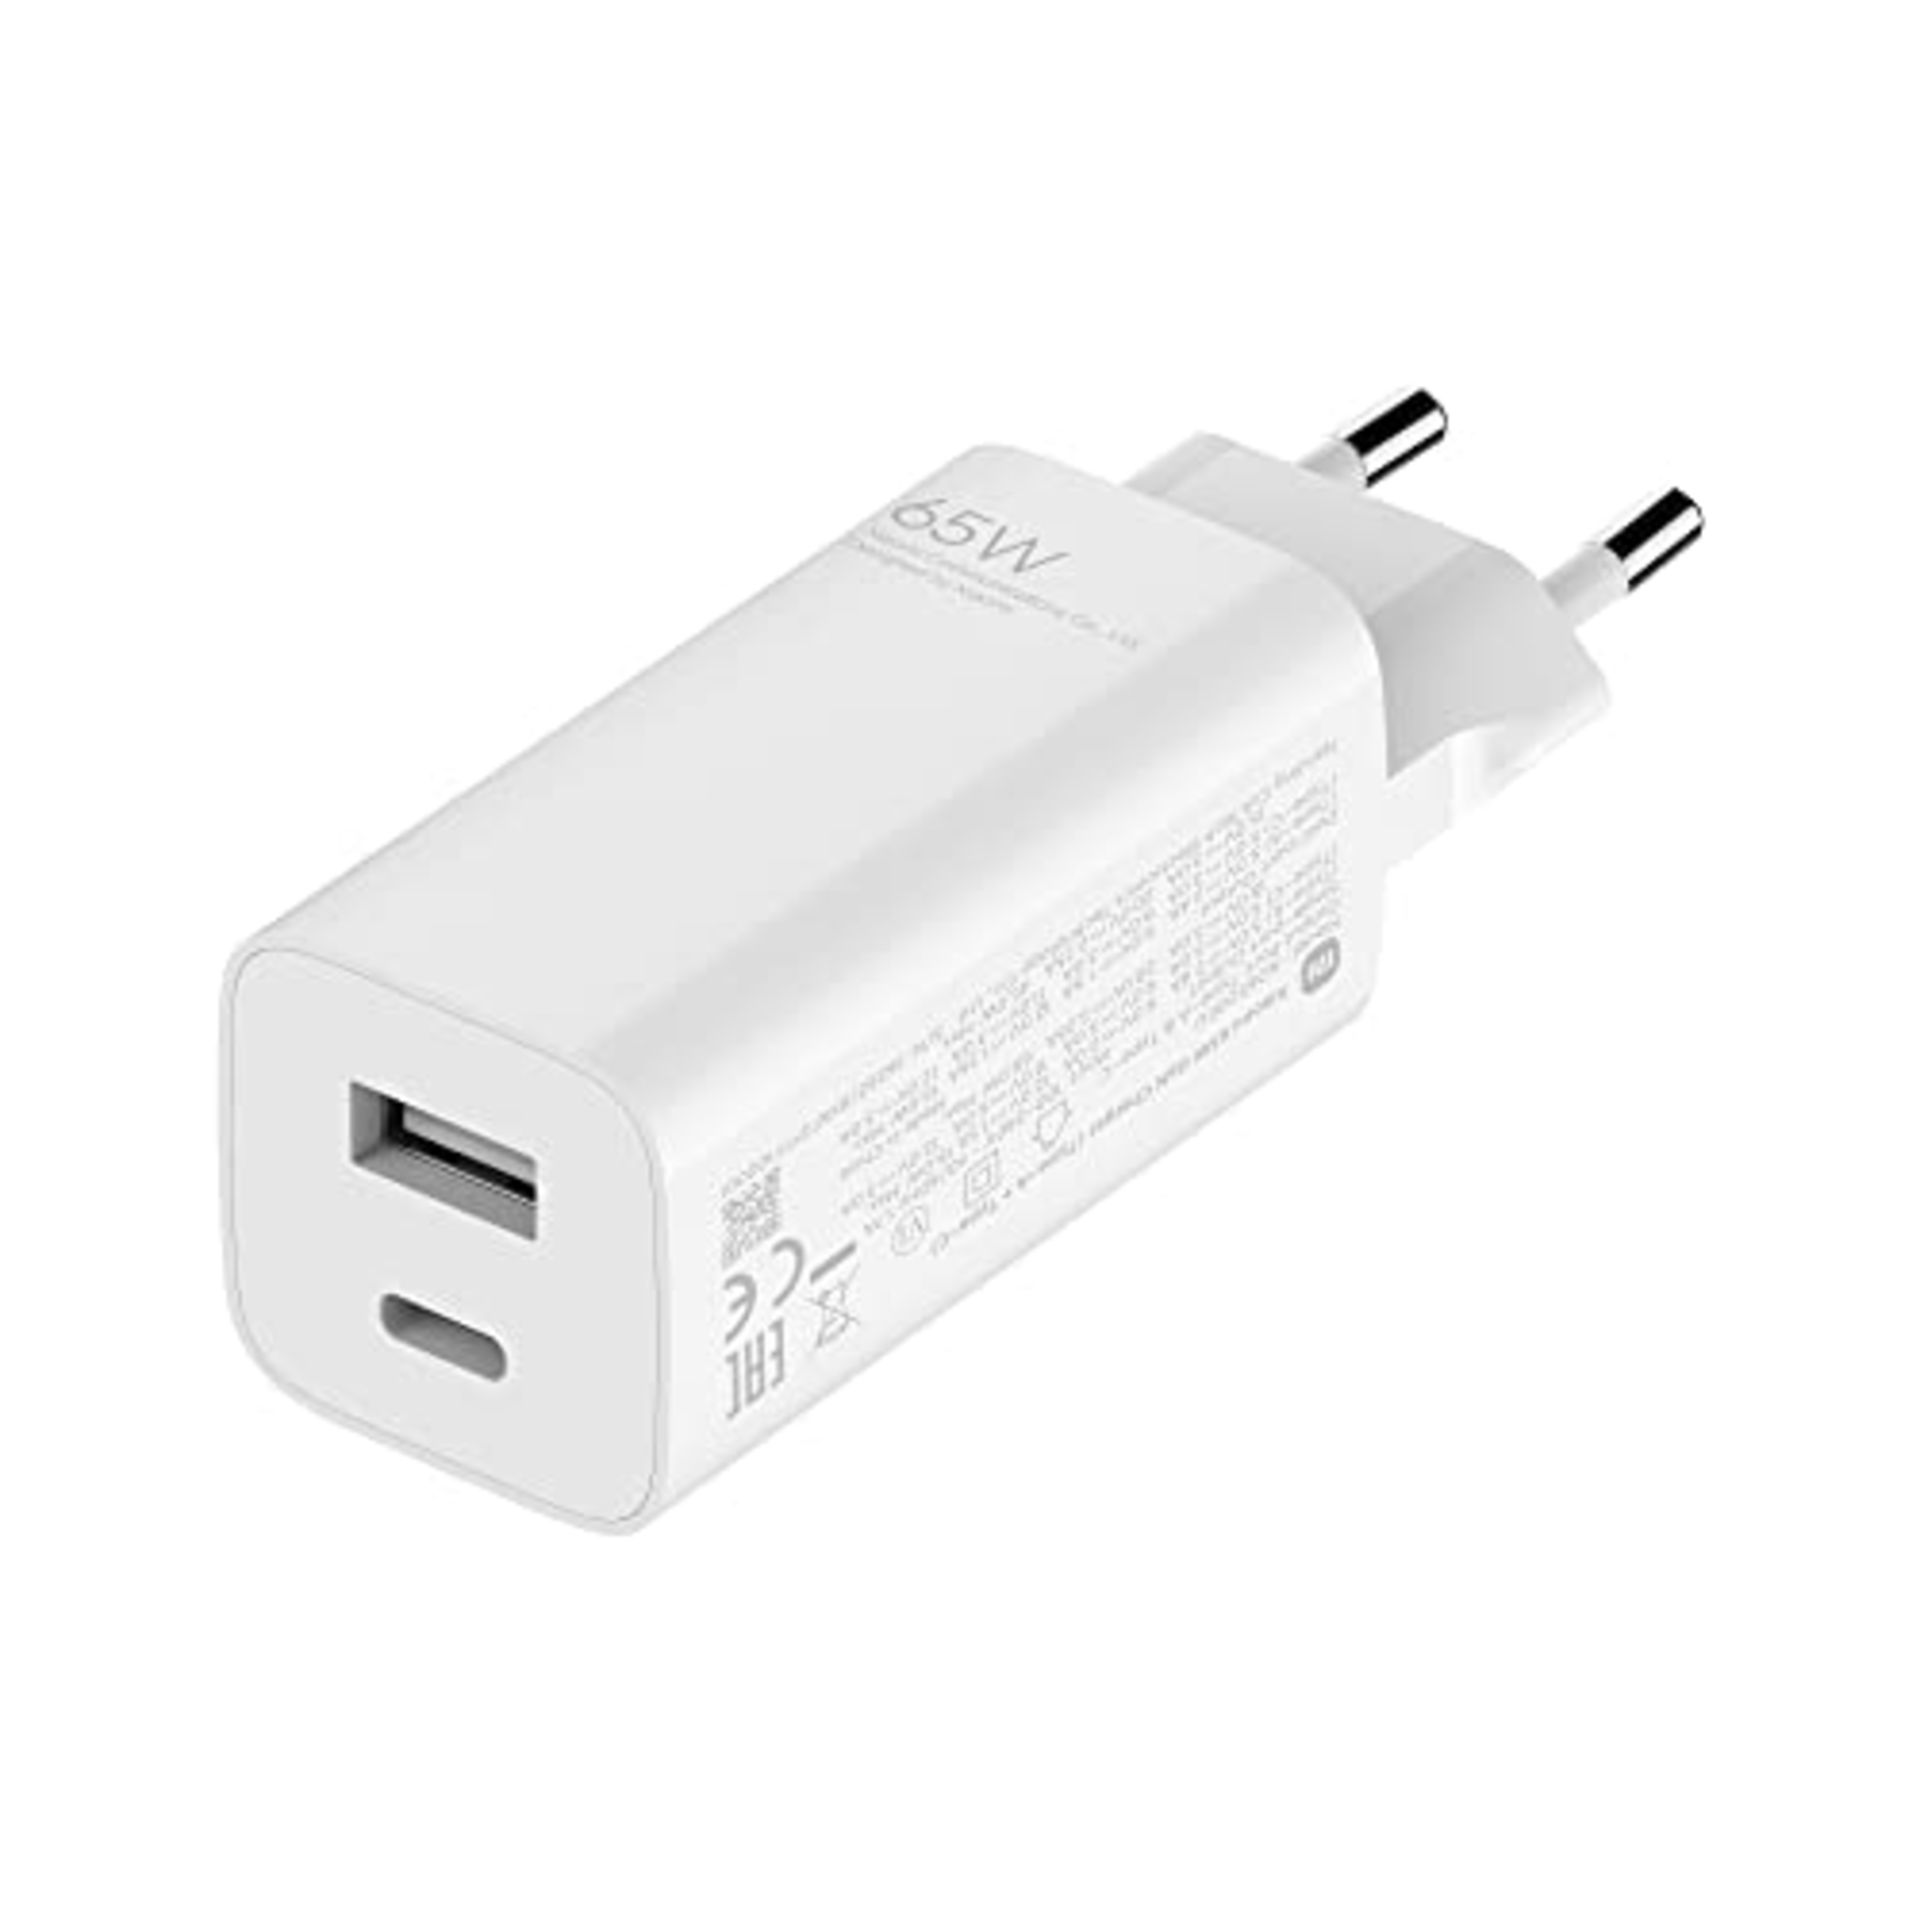 Xiaomi 65W Fast Charger with GaN technology Supports Type-A + Type-C Inputs, Charger f